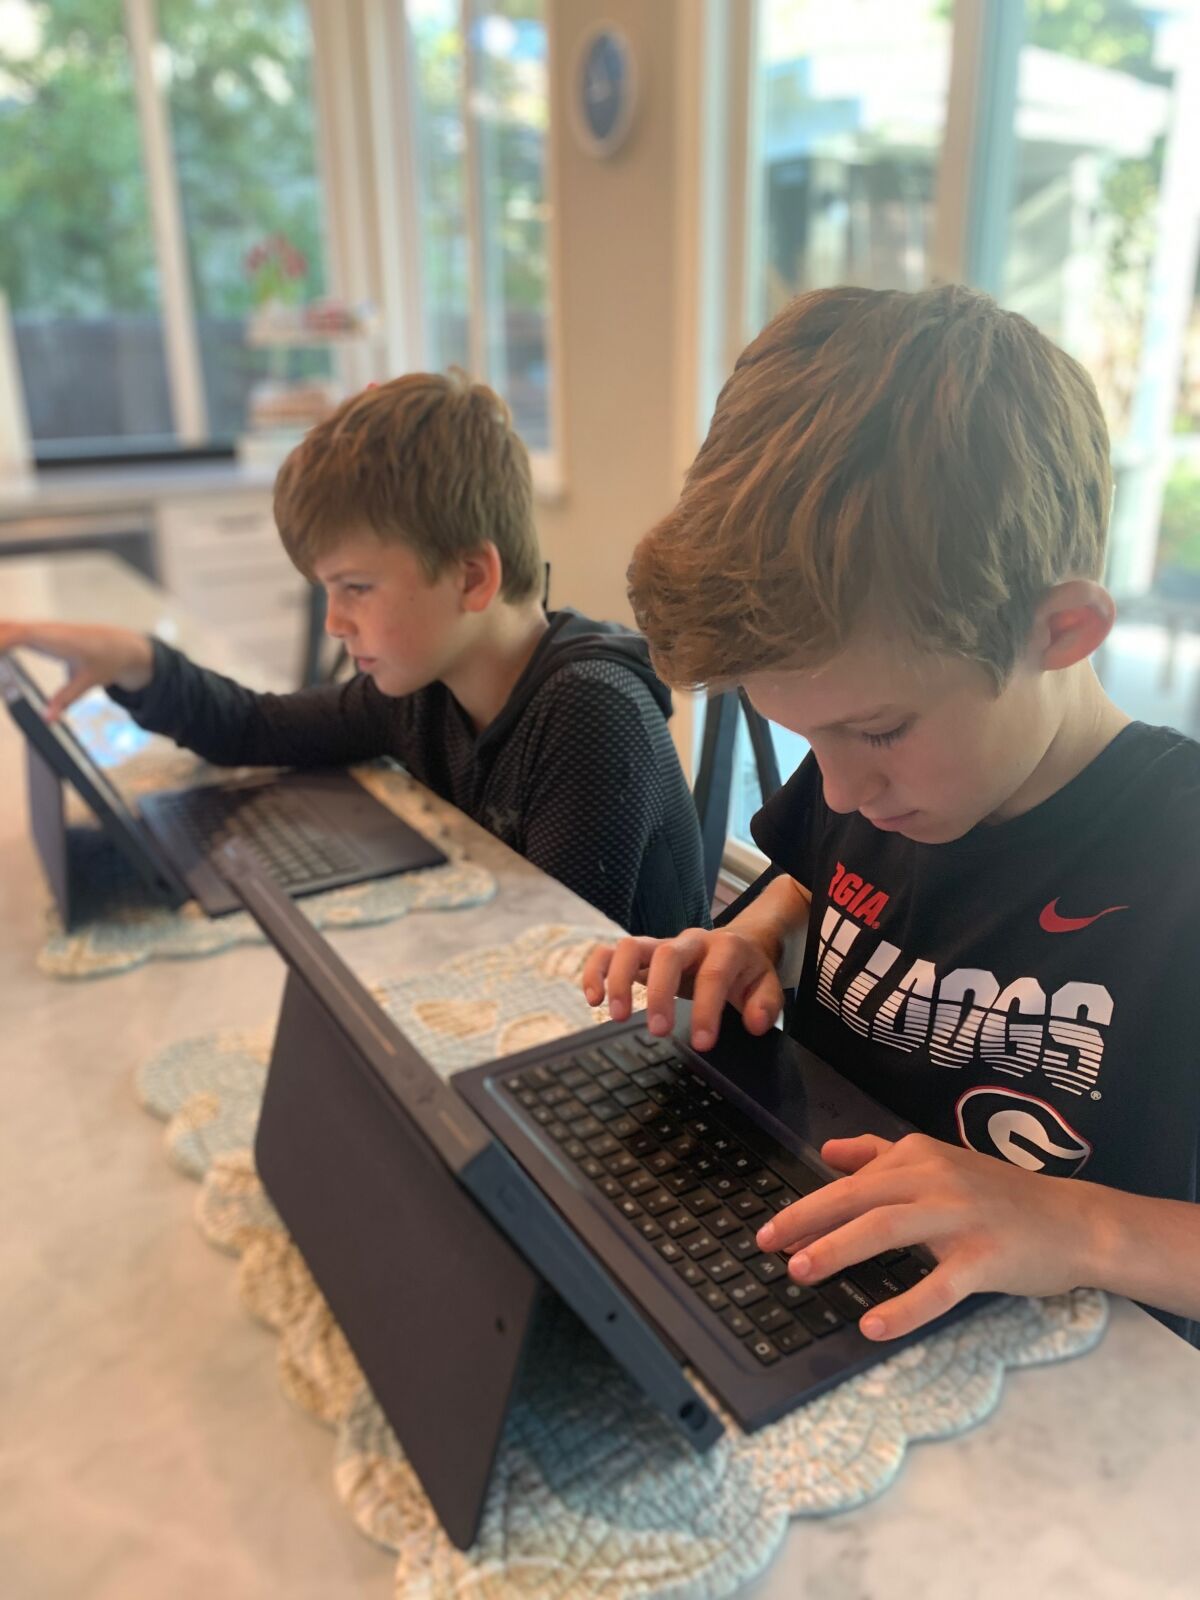 Solana Santa Fe students Liam, sixth grade, and Blake, third grade, begin distance learning in their home this week.